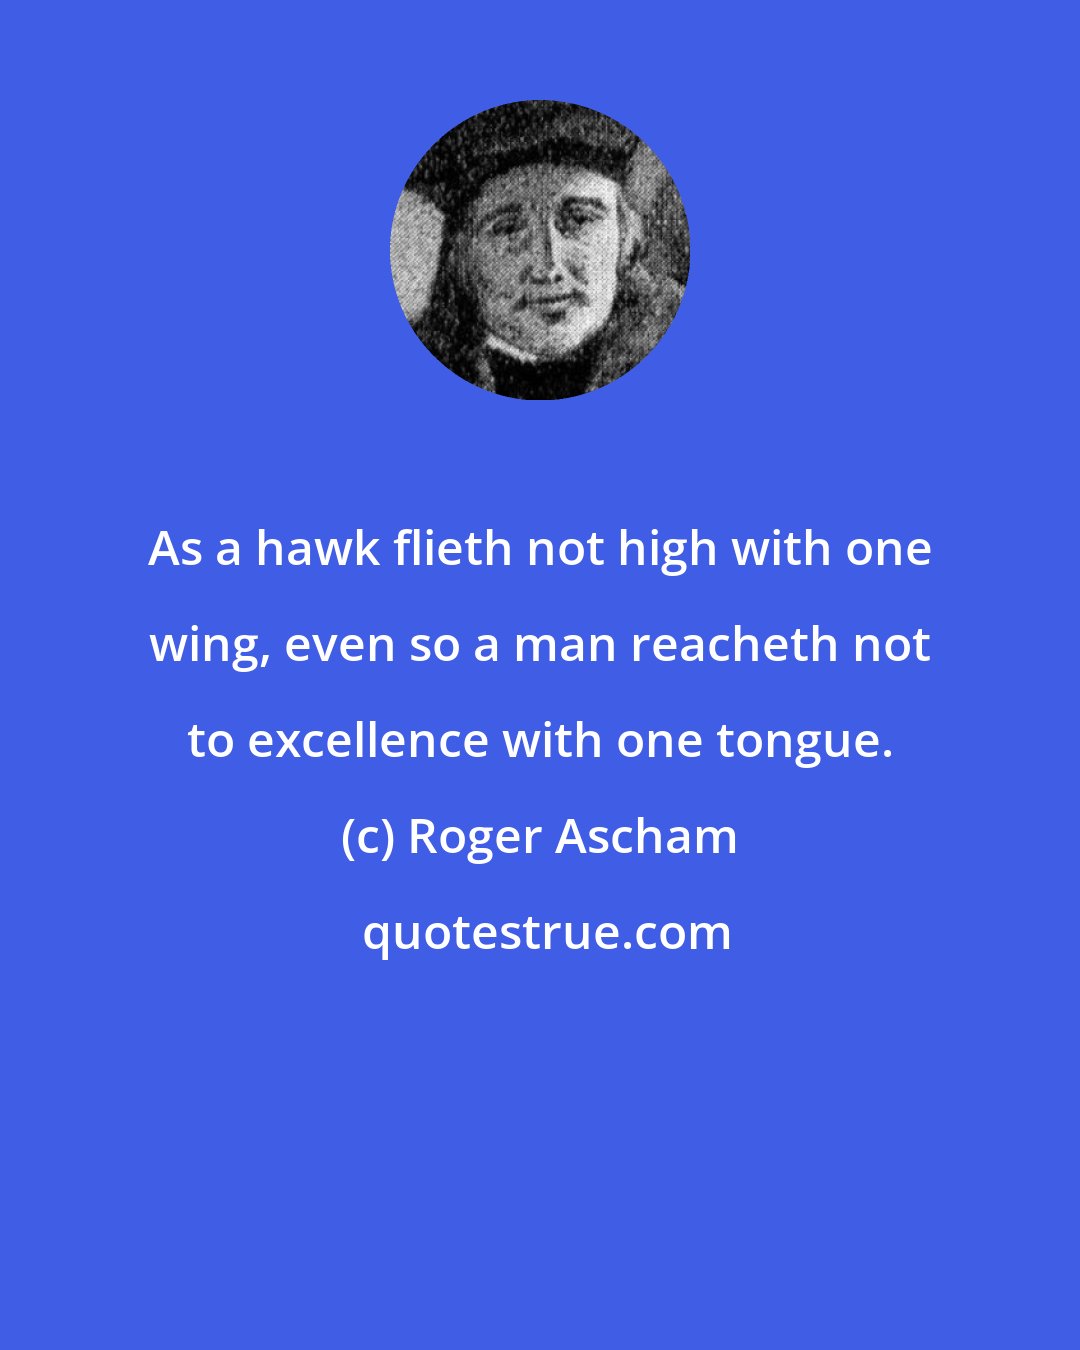 Roger Ascham: As a hawk flieth not high with one wing, even so a man reacheth not to excellence with one tongue.